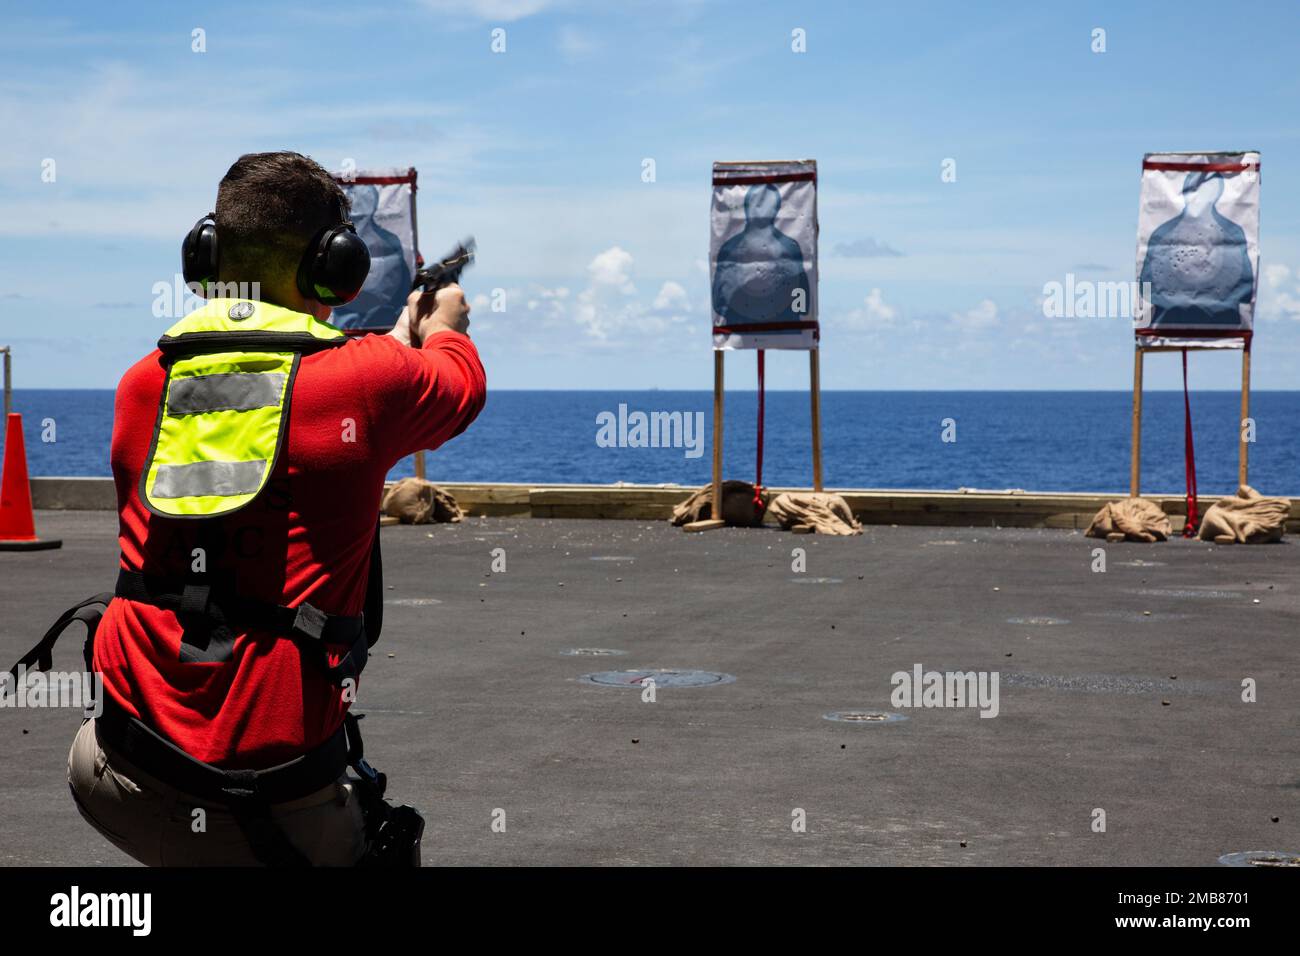 PHILIPPINE SEA (June 13, 2022) Chief Aviation Ordnanceman Ryan Heeney, from Portland, Ore., shoots an M9 service pistol during a live-fire exercise aboard the Nimitz-class aircraft carrier USS Abraham Lincoln (CVN 72). Abraham Lincoln Strike Group is on a scheduled deployment in the U.S. 7th Fleet area of operations to enhance interoperability through alliances and partnerships while serving as a ready-response force in support of a free and open Indo-Pacific region. Stock Photo